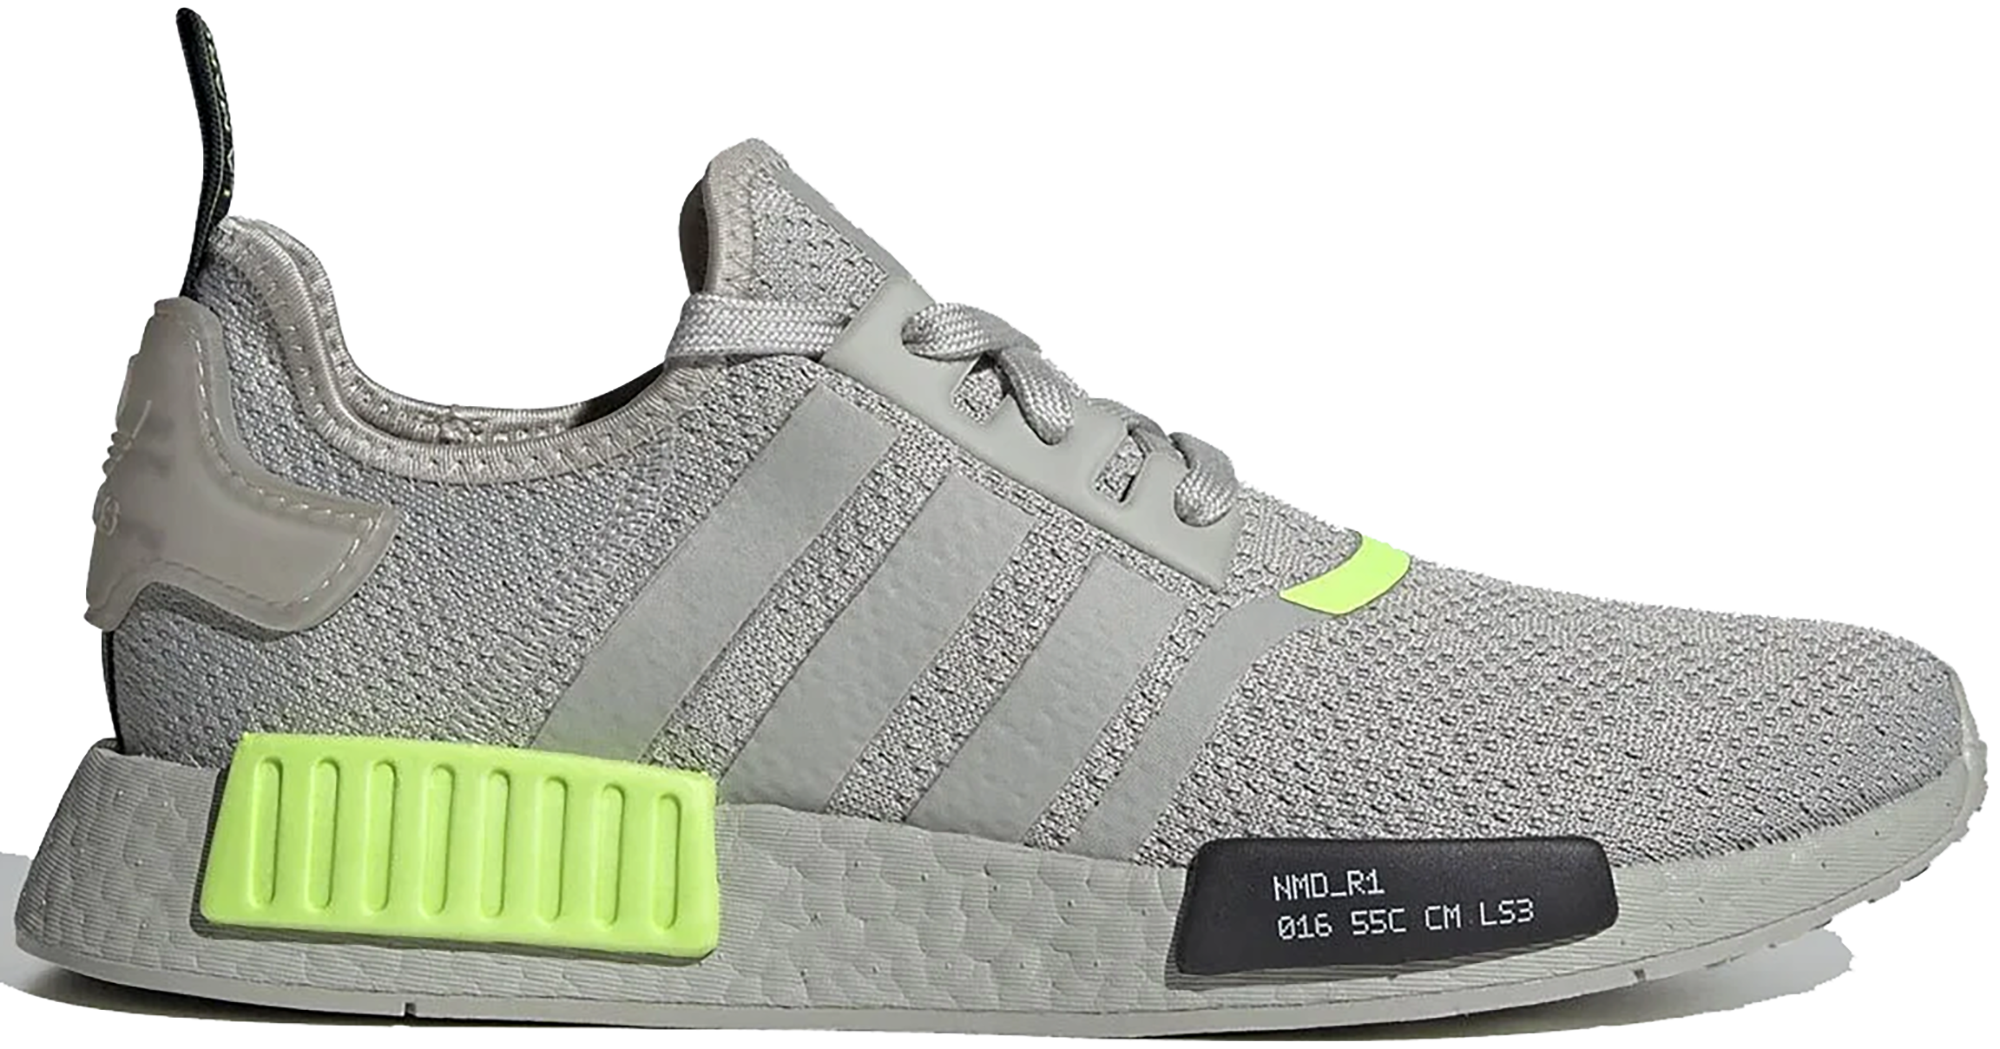 nmd r1 gray and black